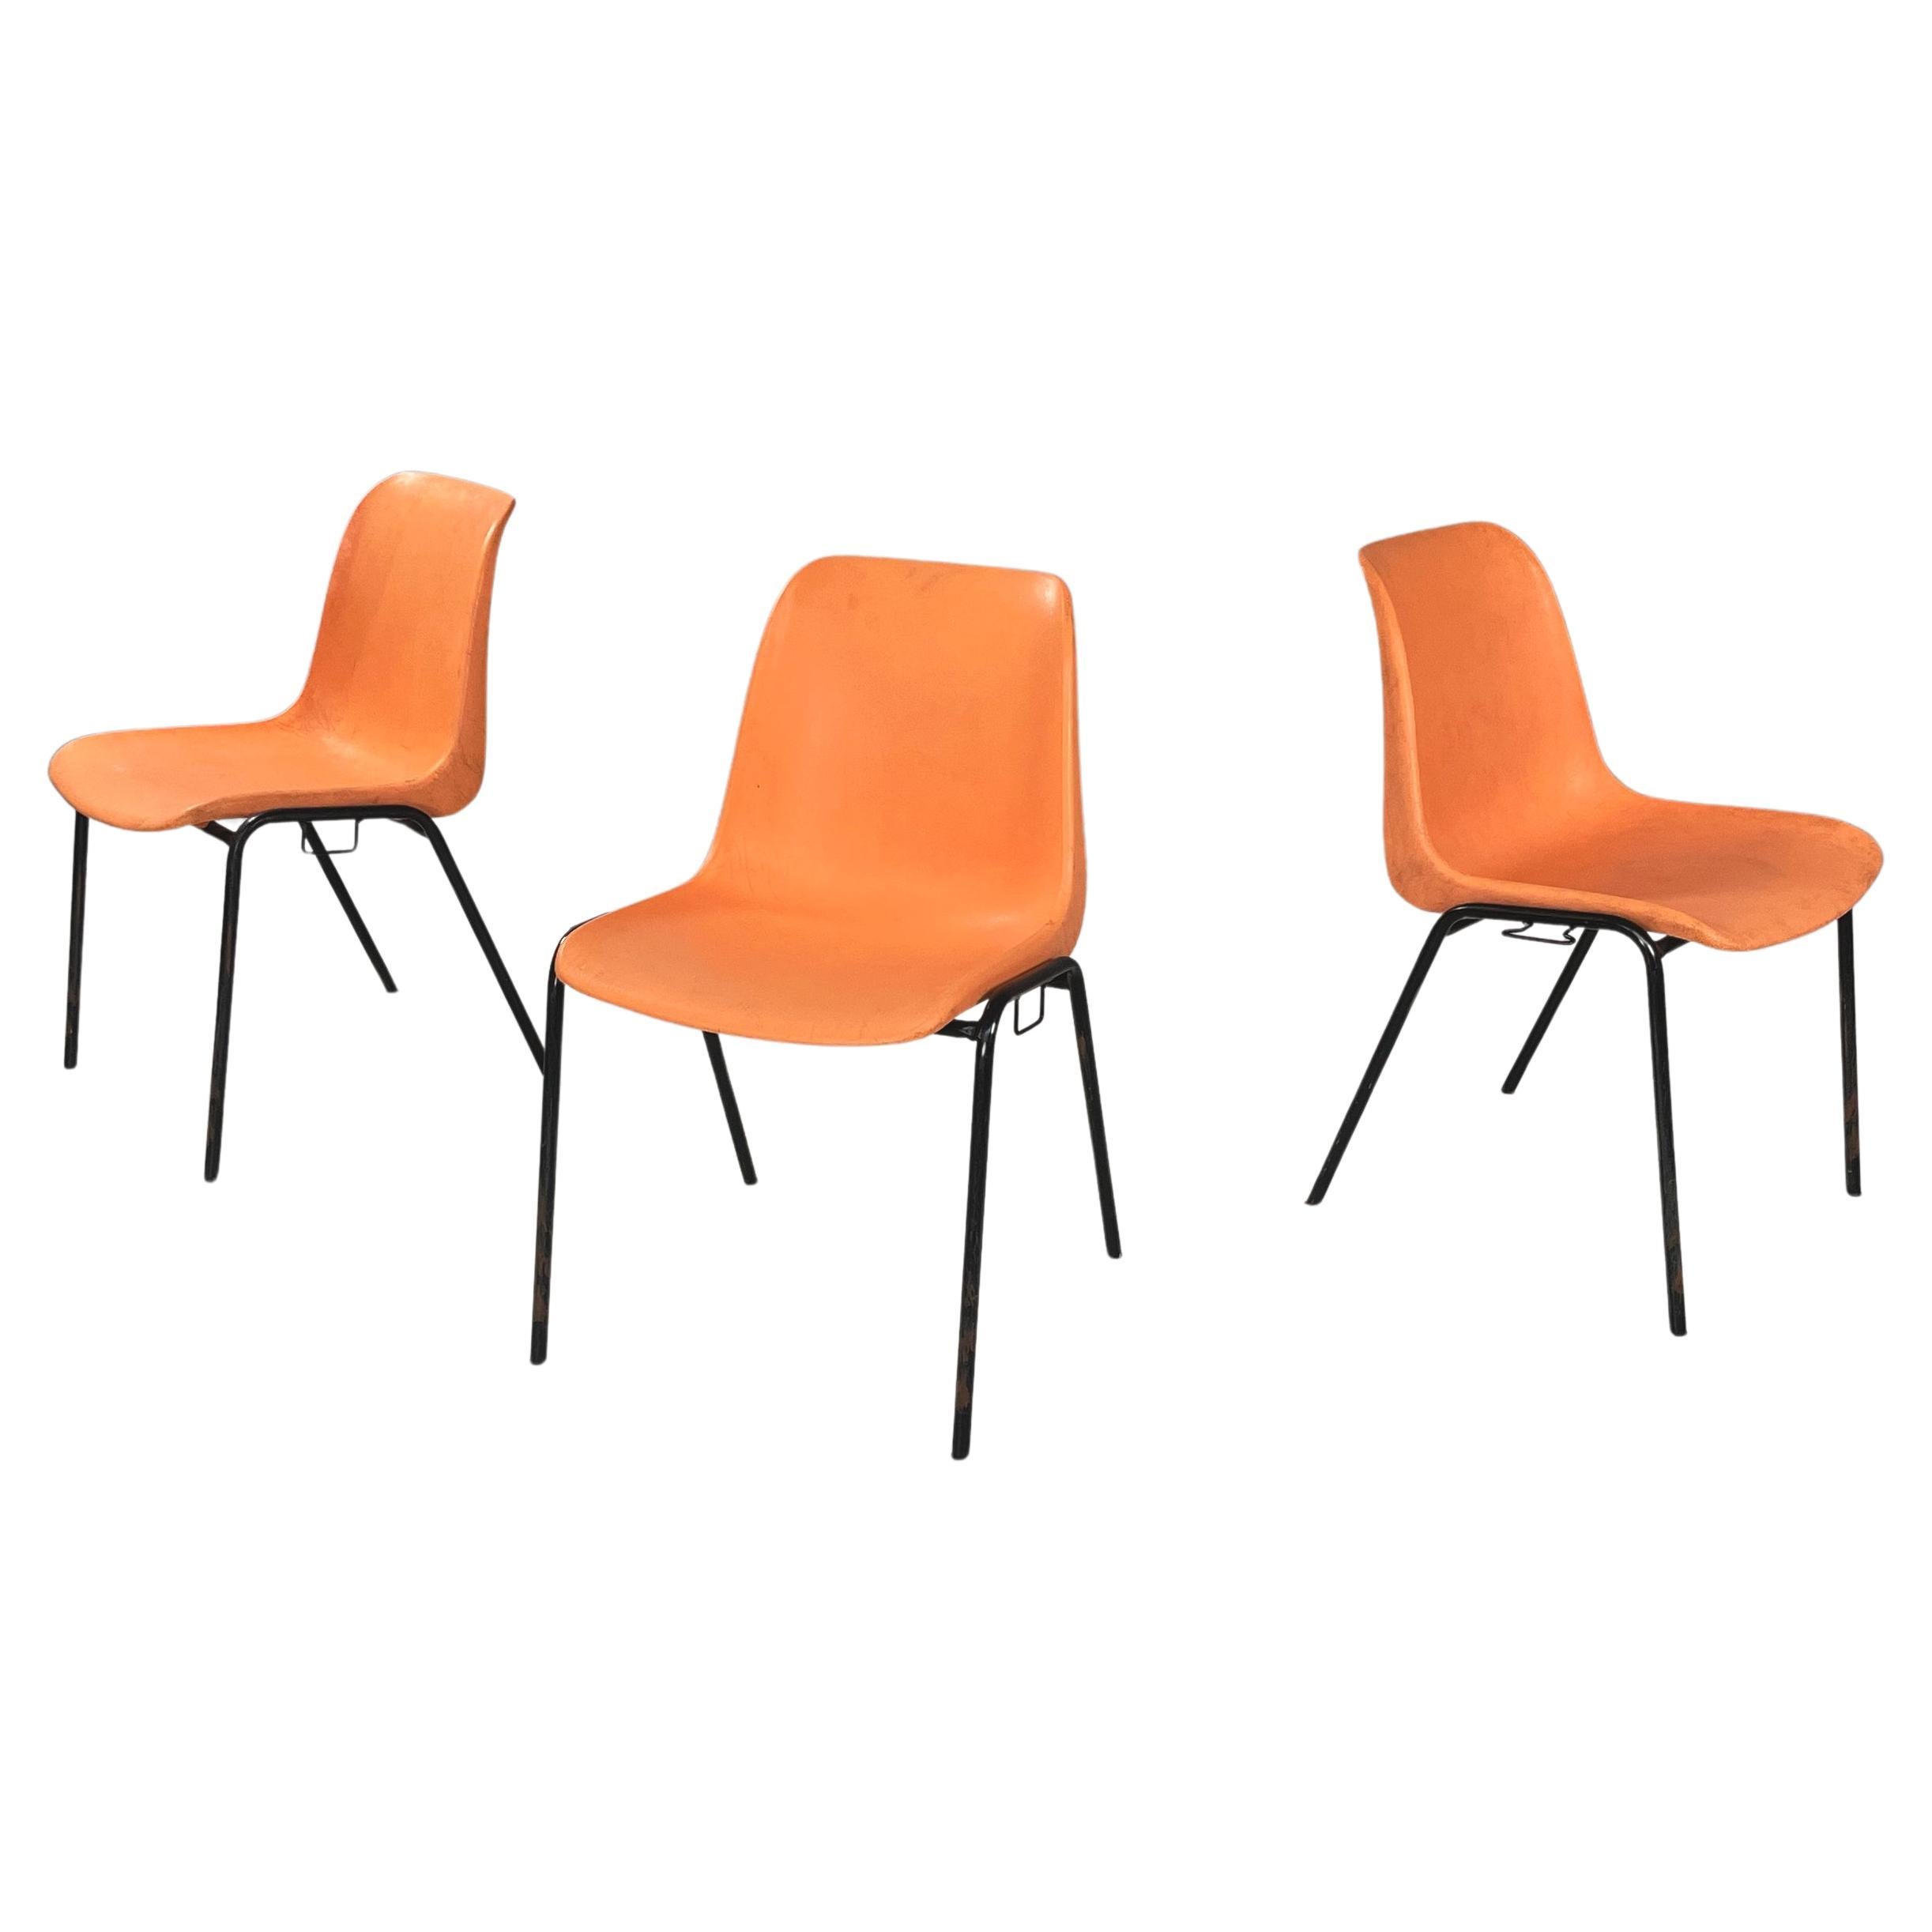 Italian modern Stackable chairs in orange plastic and black metal, 2001 For Sale